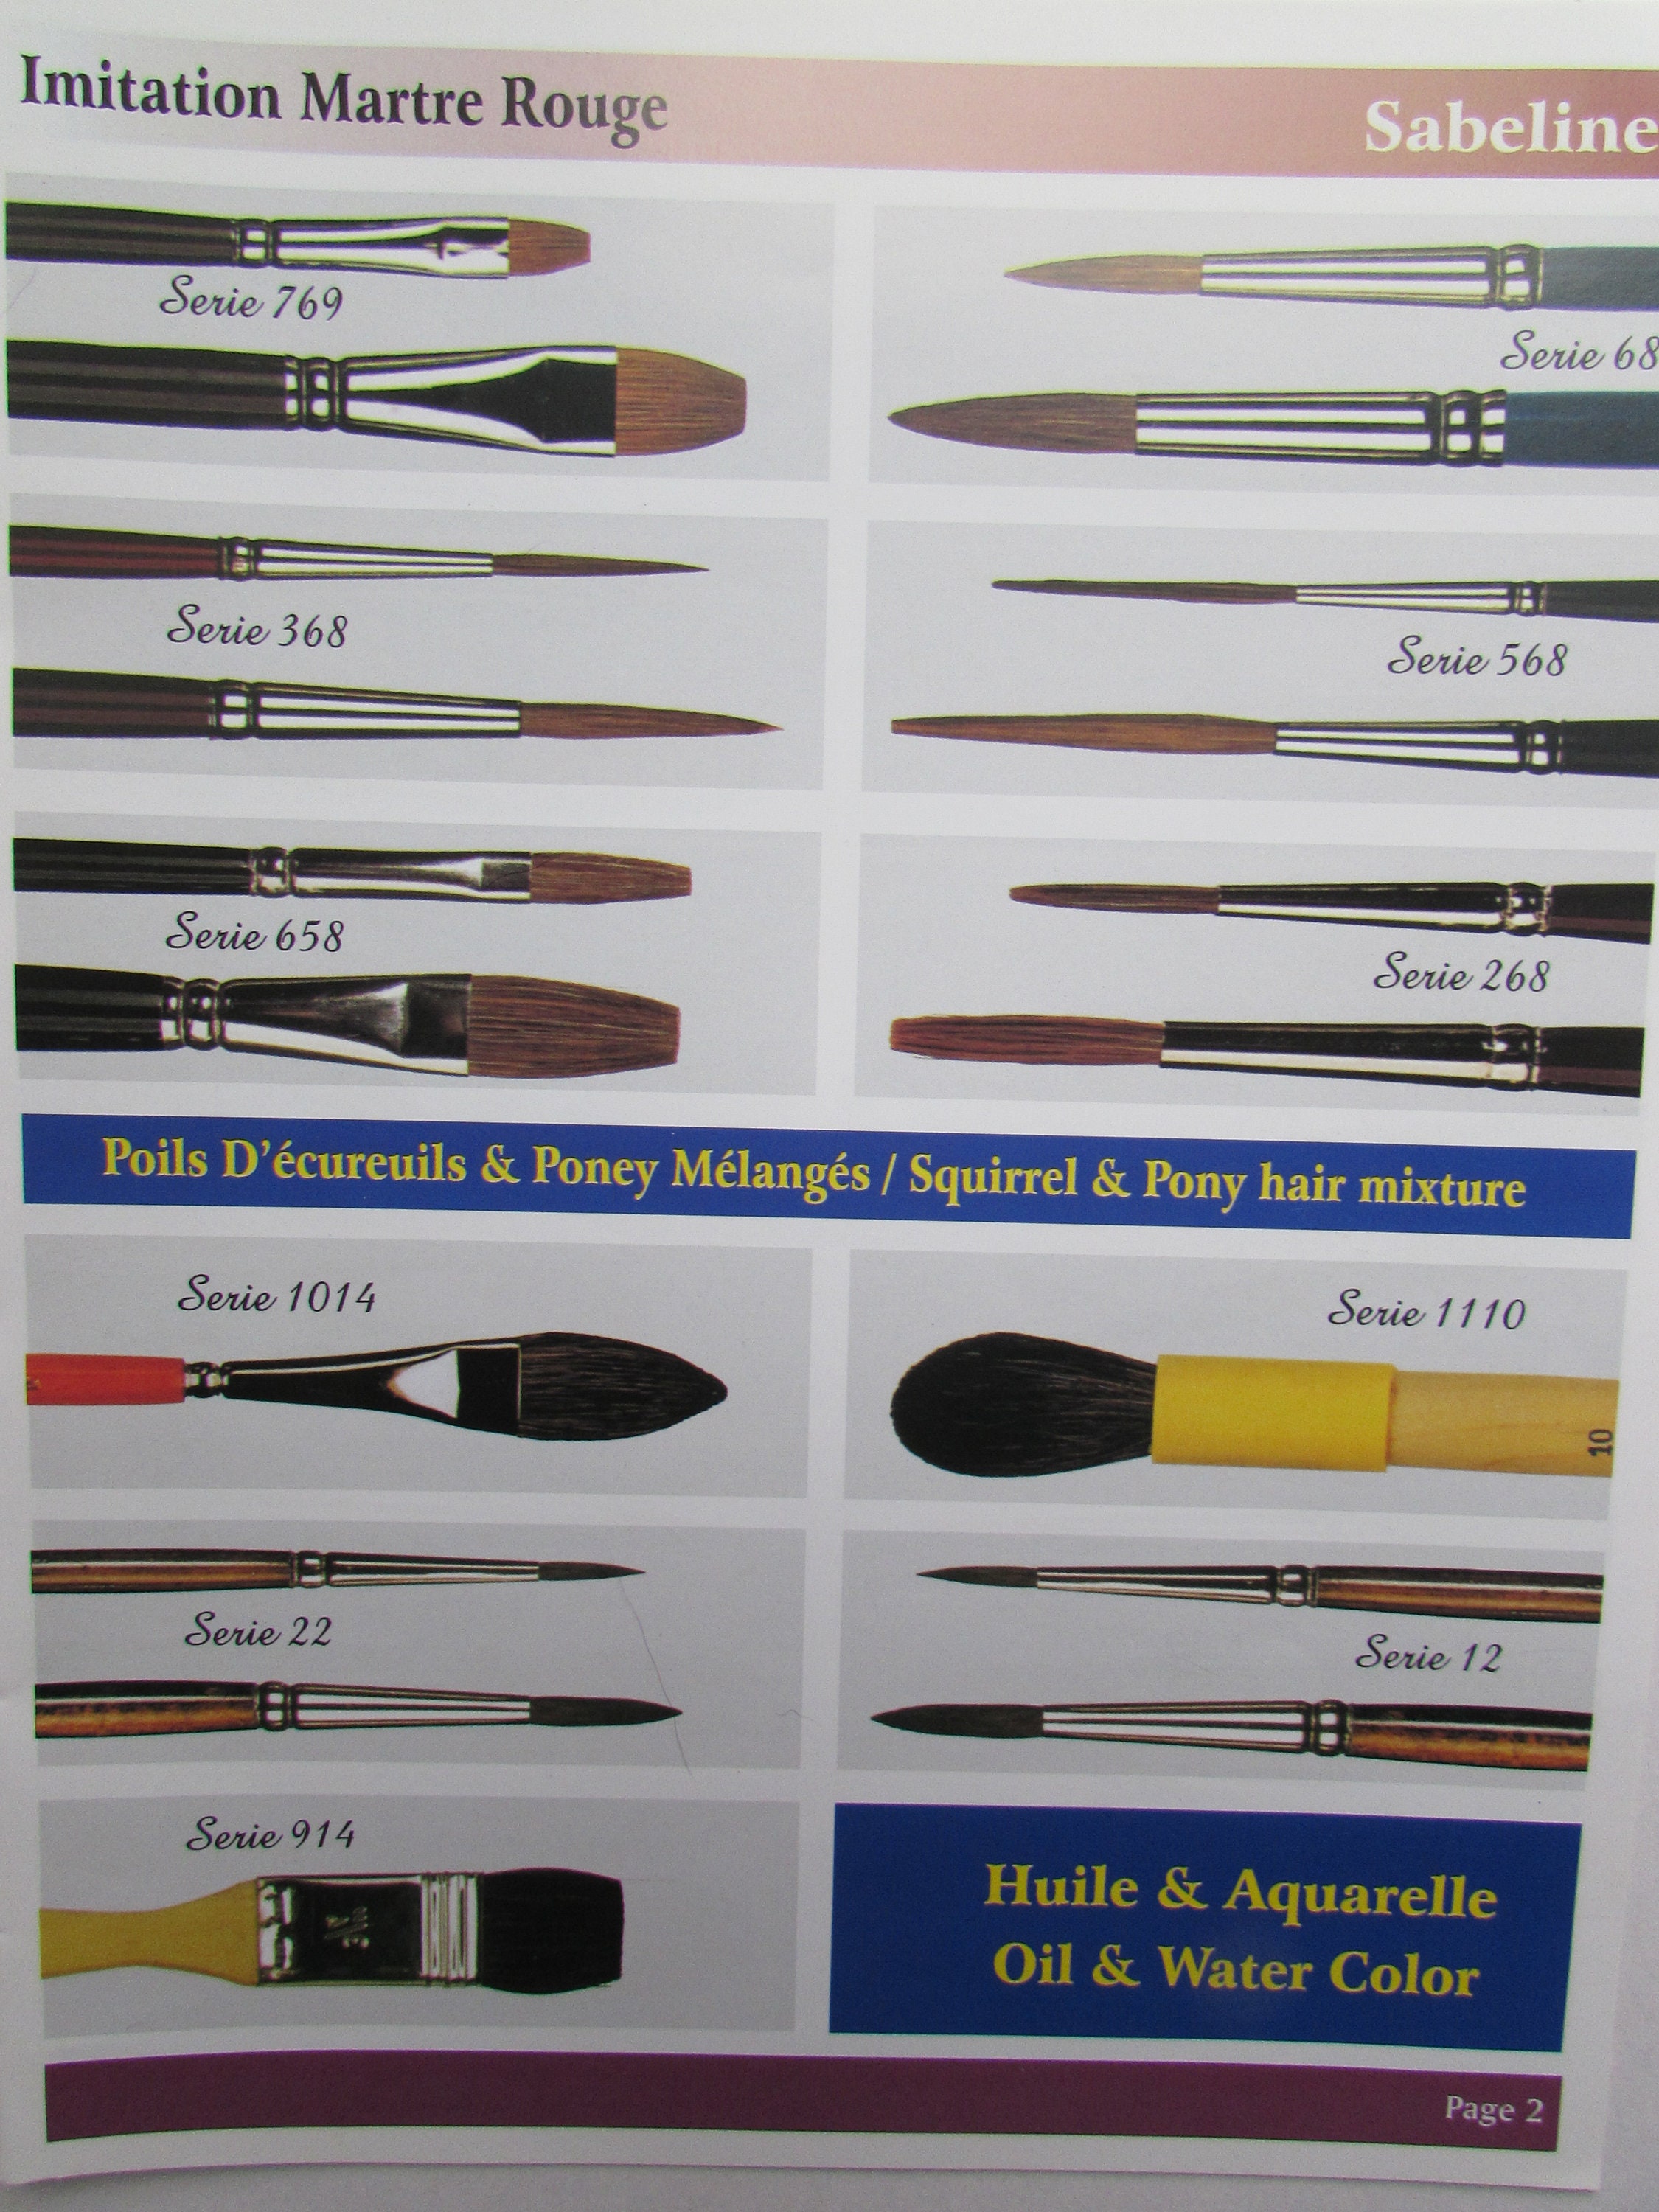 Artist Finest Sable Imitation sableline Round Watercolor Brushes Made in  Germany Please Choose Your Size -  Sweden